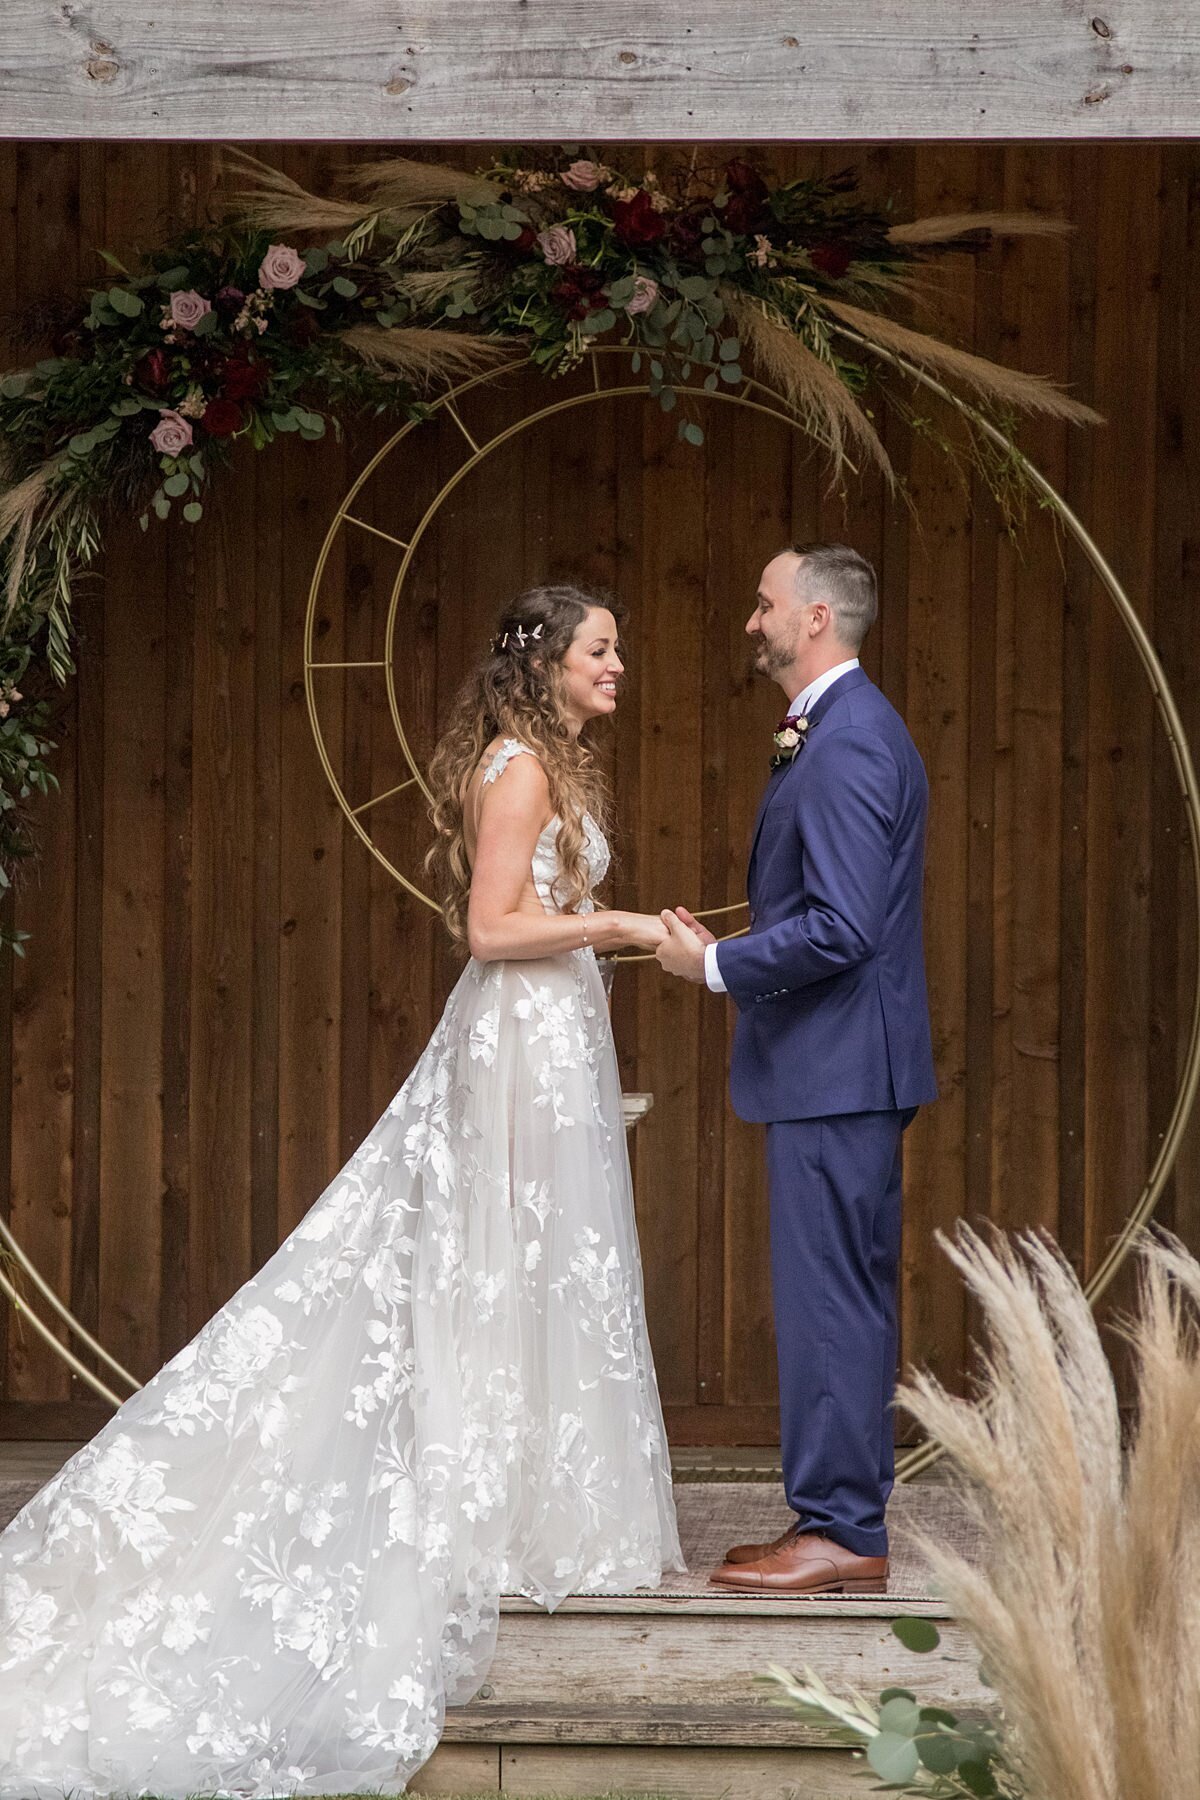 The bride, wearing a long sleeveless lace wedding dress with a plunging neckline holds hands with the groom wearing a navy suit and burgundy tie under the rustic log wedding pavilion at Saddle Woods Farm. They are standing in front of their gold circular ceremony arbor with a crescent moon and boho burgundy and blush wedding flowers with pampas grass.